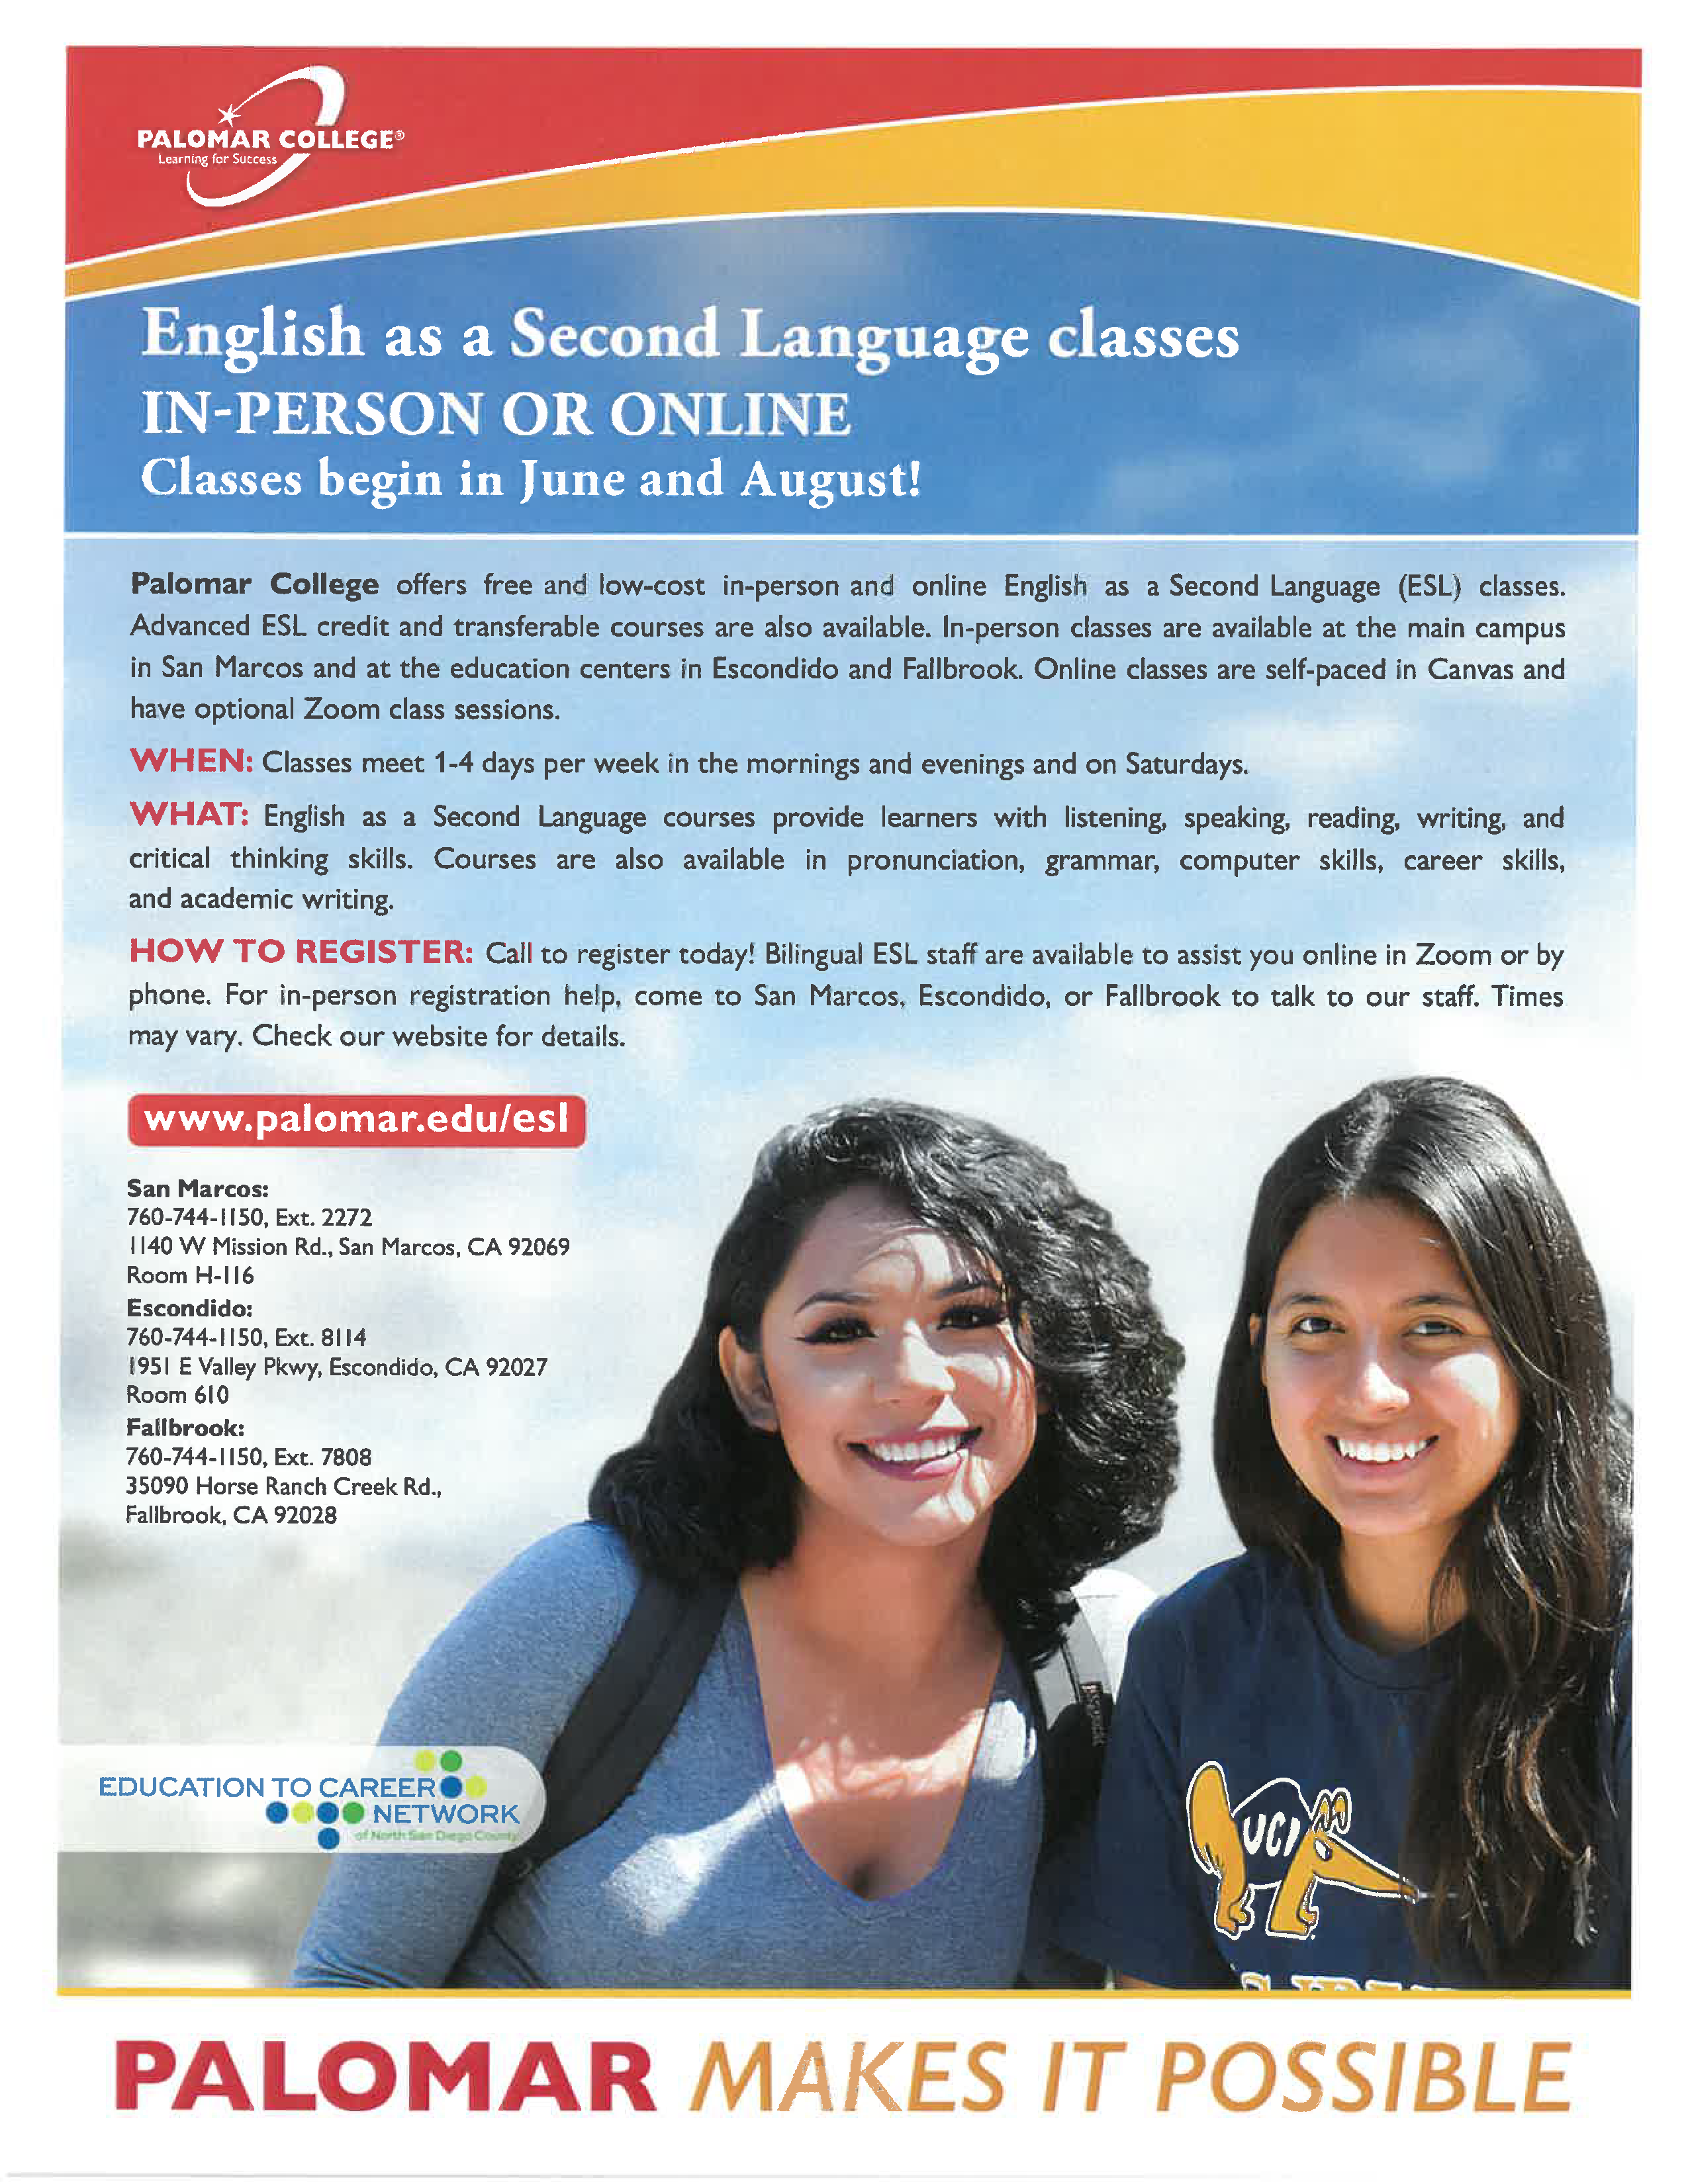 Palomar College offers free and low-cost in-person and online English as a Second Language (ESL} classes.